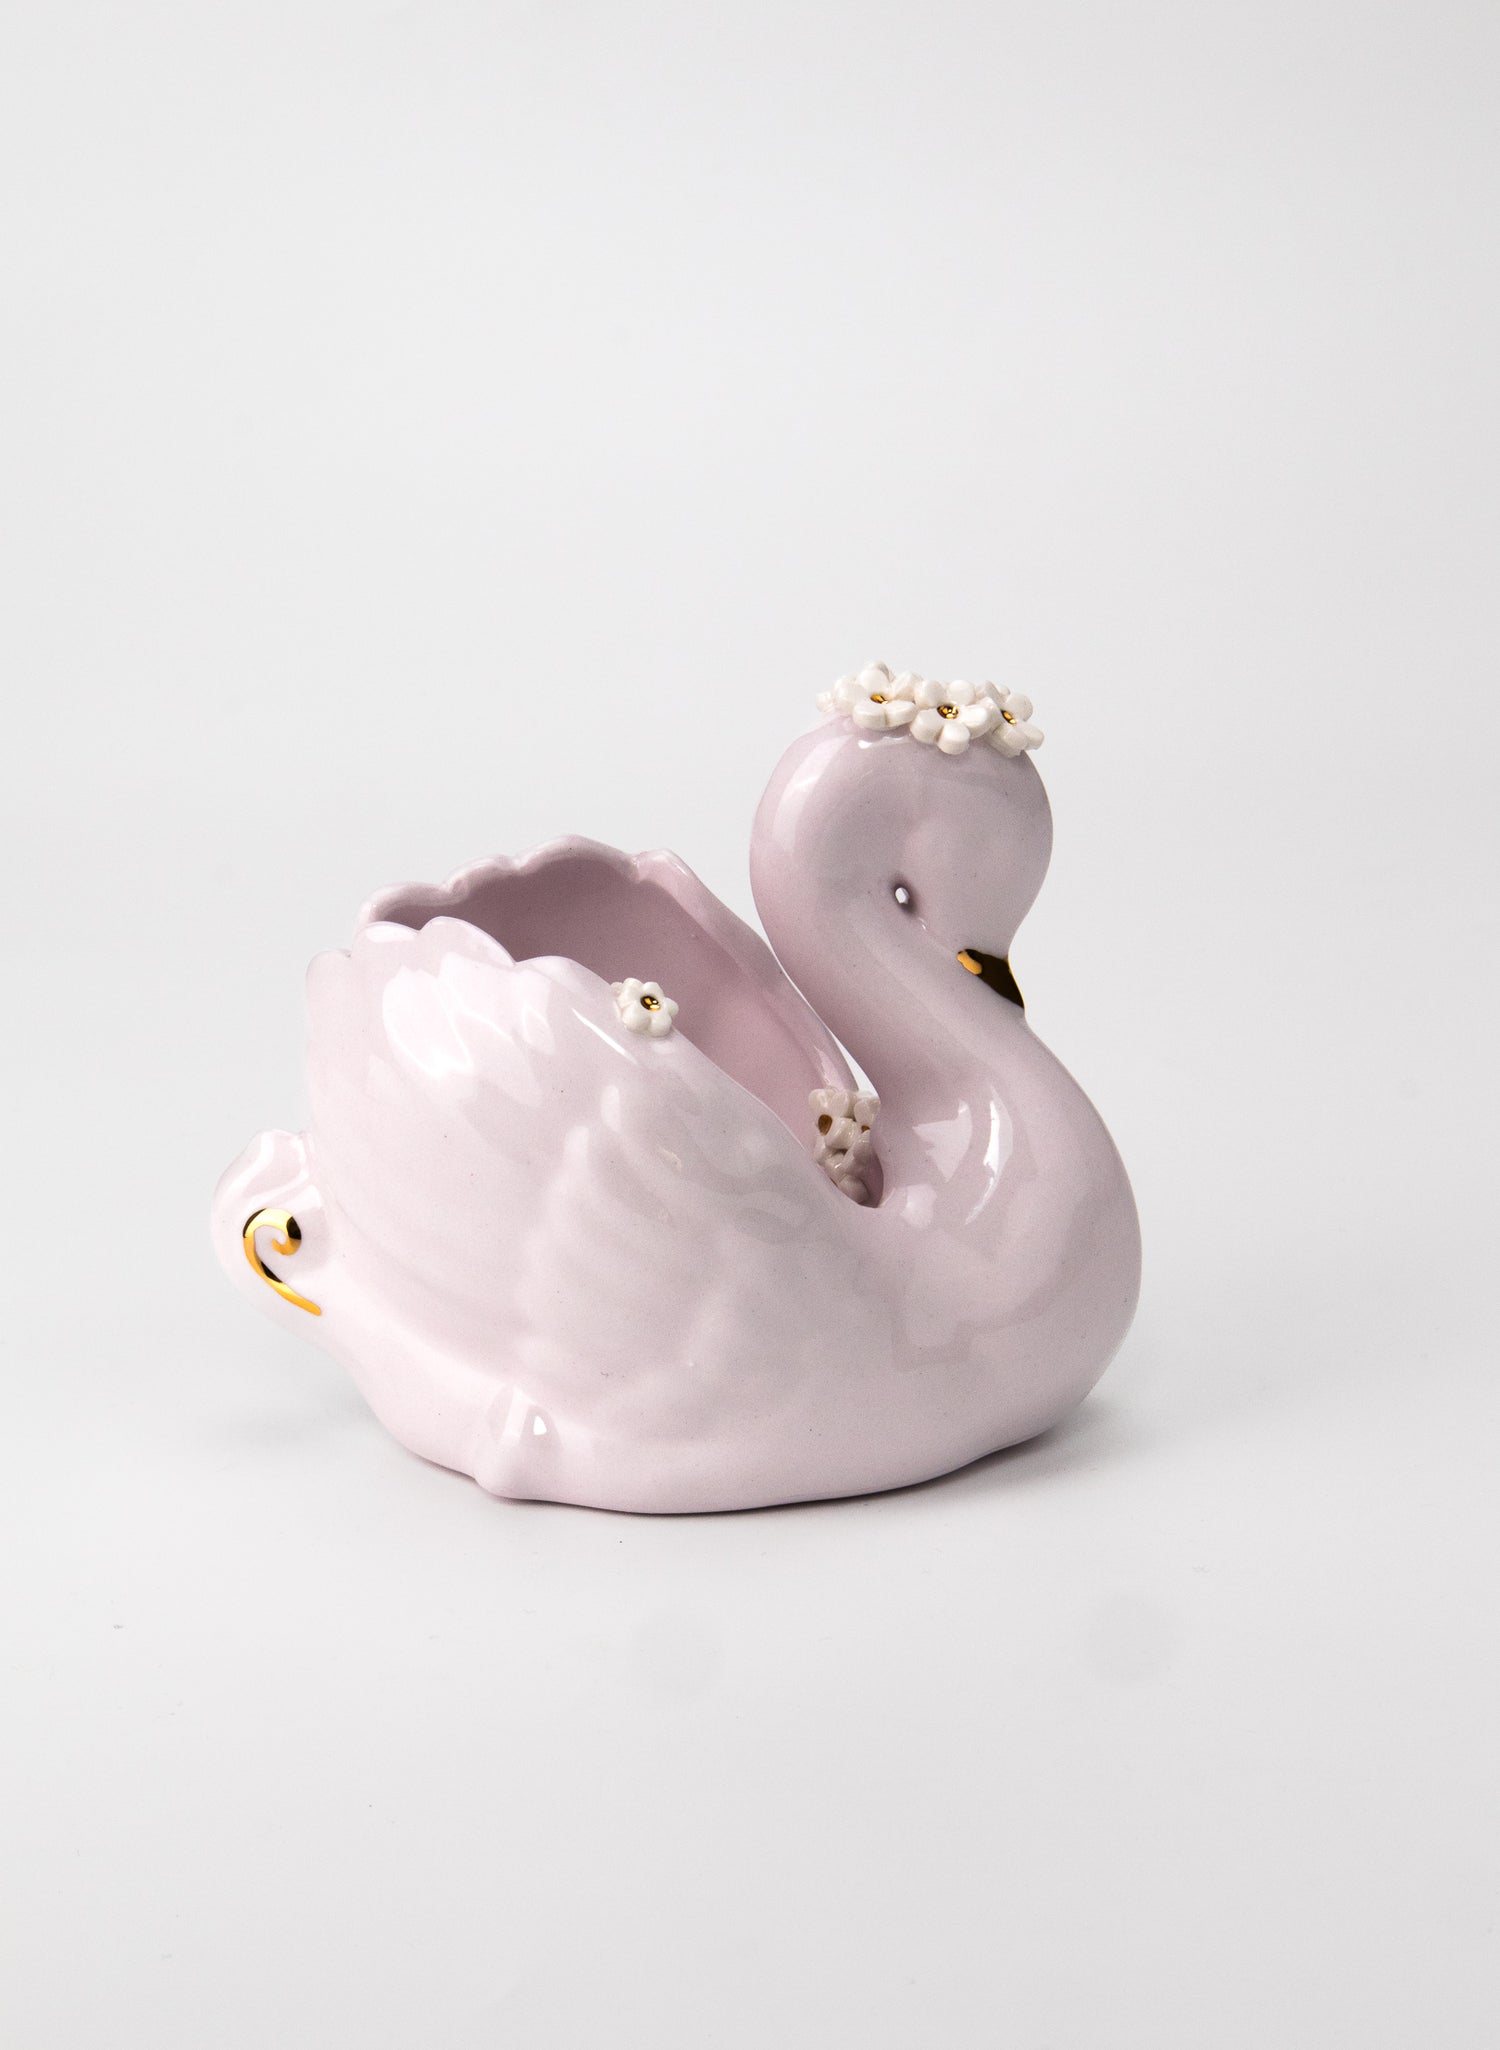 Medium Light Pastel Pink Swan with Gold and White Flowers